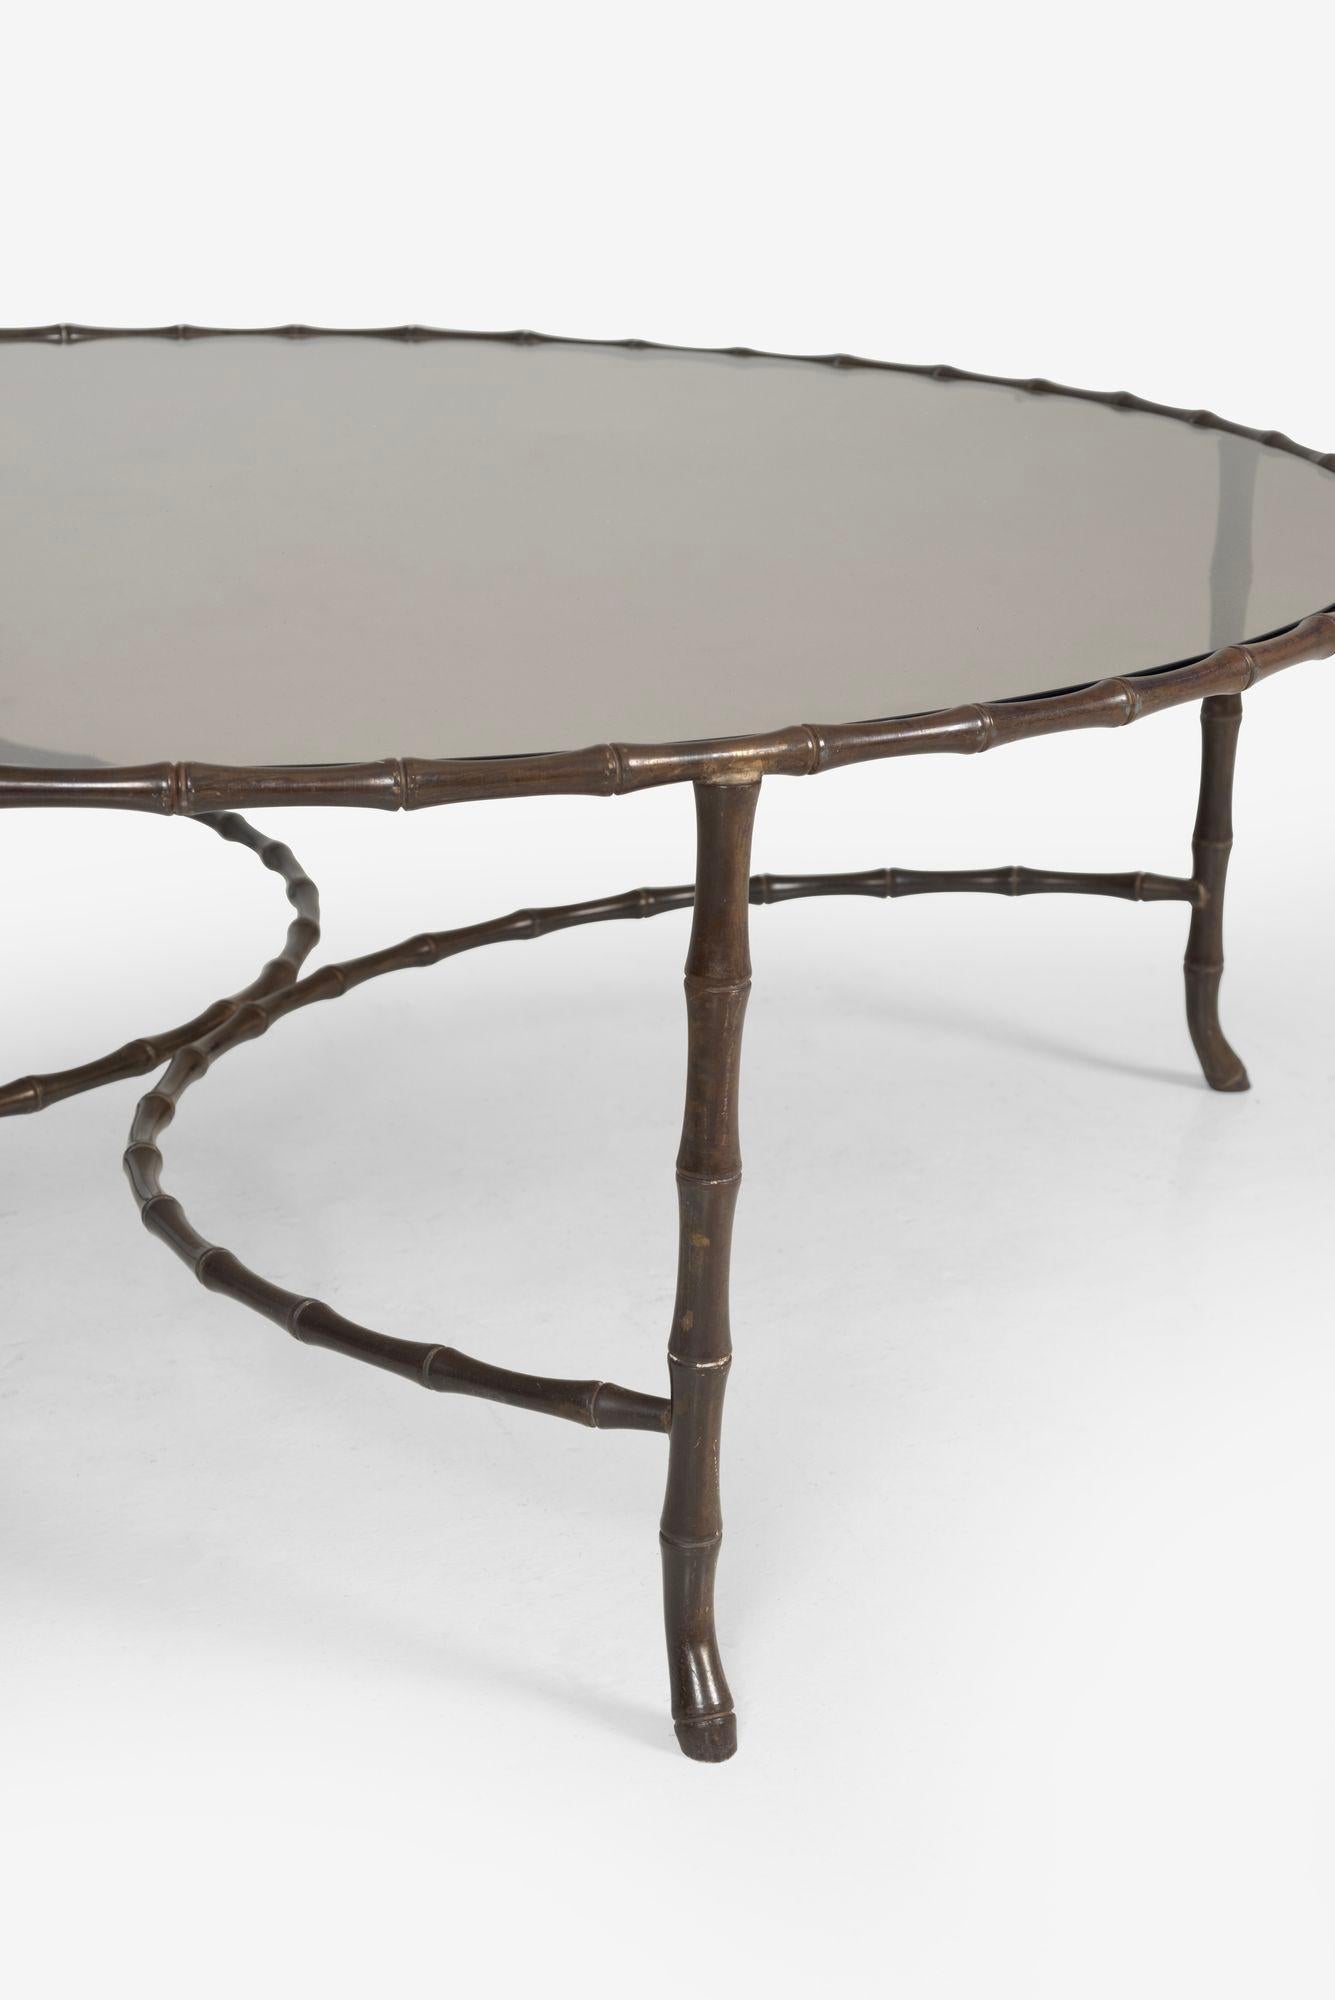 Maison Jansen Style Faux Metal Bamboo Round Cocktail Table In Good Condition For Sale In Chicago, IL